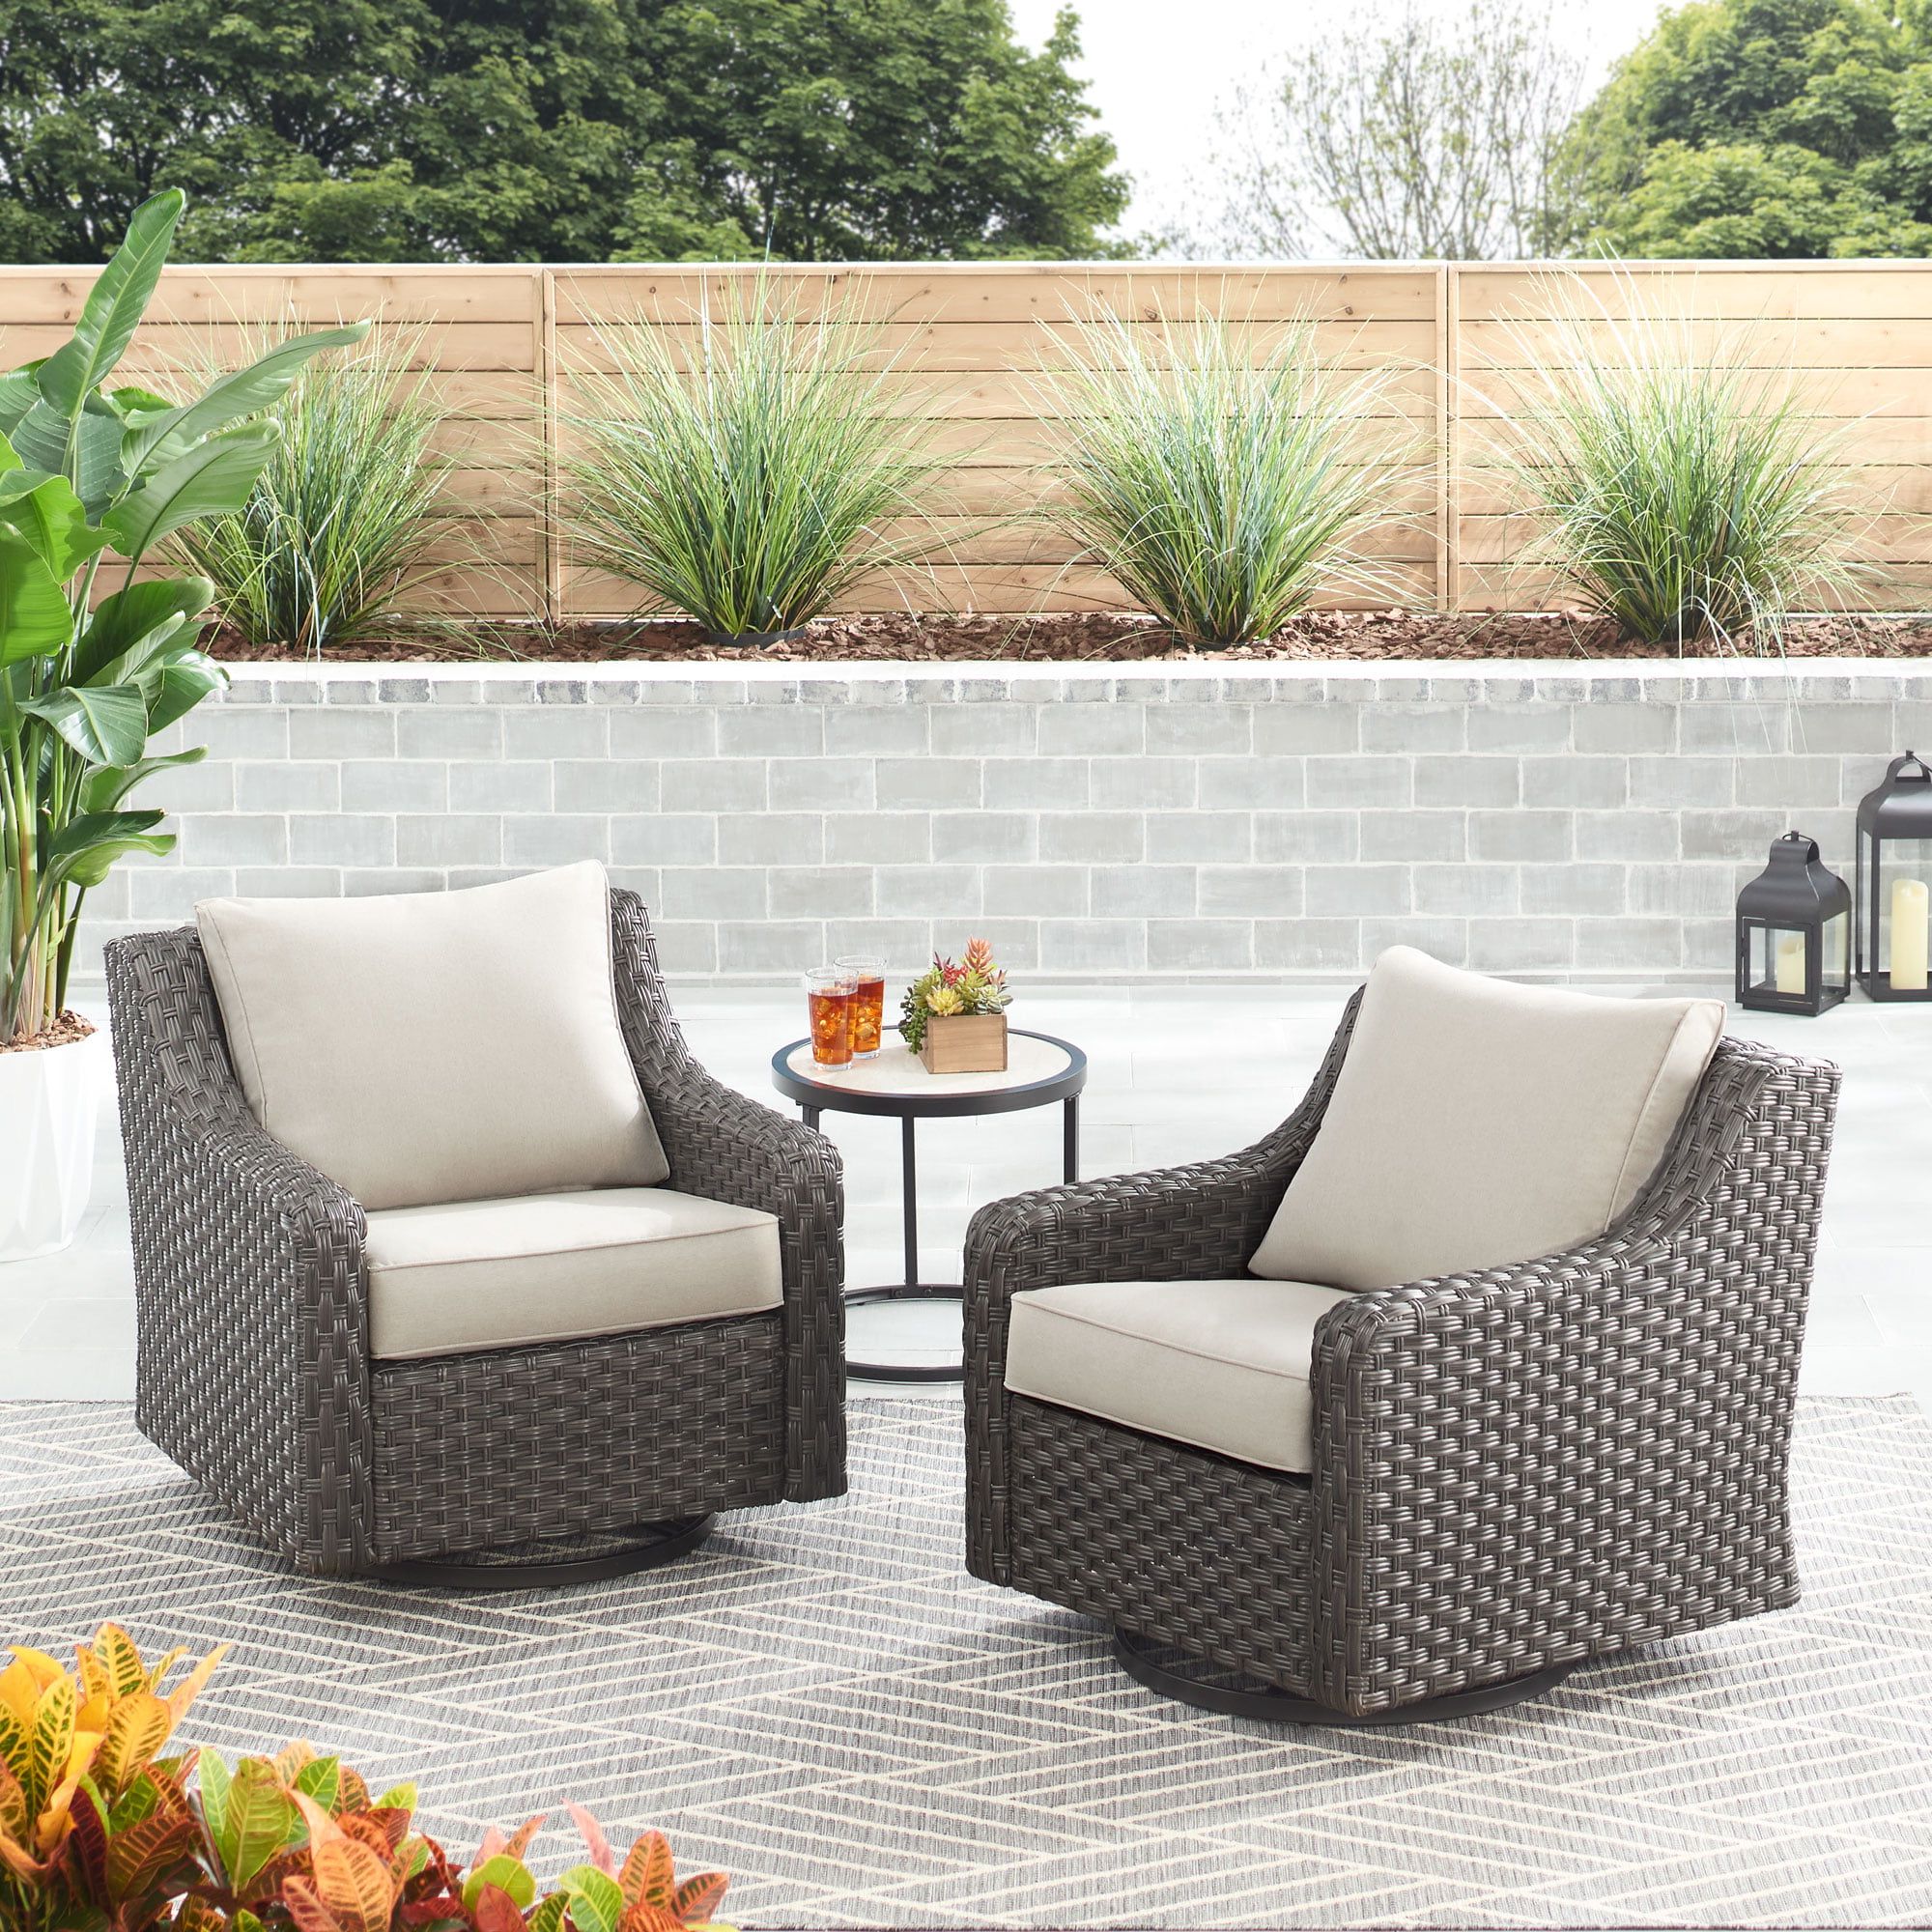 Most Recently Released Better Homes & Gardens River Oaks 2 Piece Wicker Swivel Glider With Patio  Covers, Dark – Walmart With Regard To 2 Piece Swivel Gliders With Patio Cover (View 2 of 15)